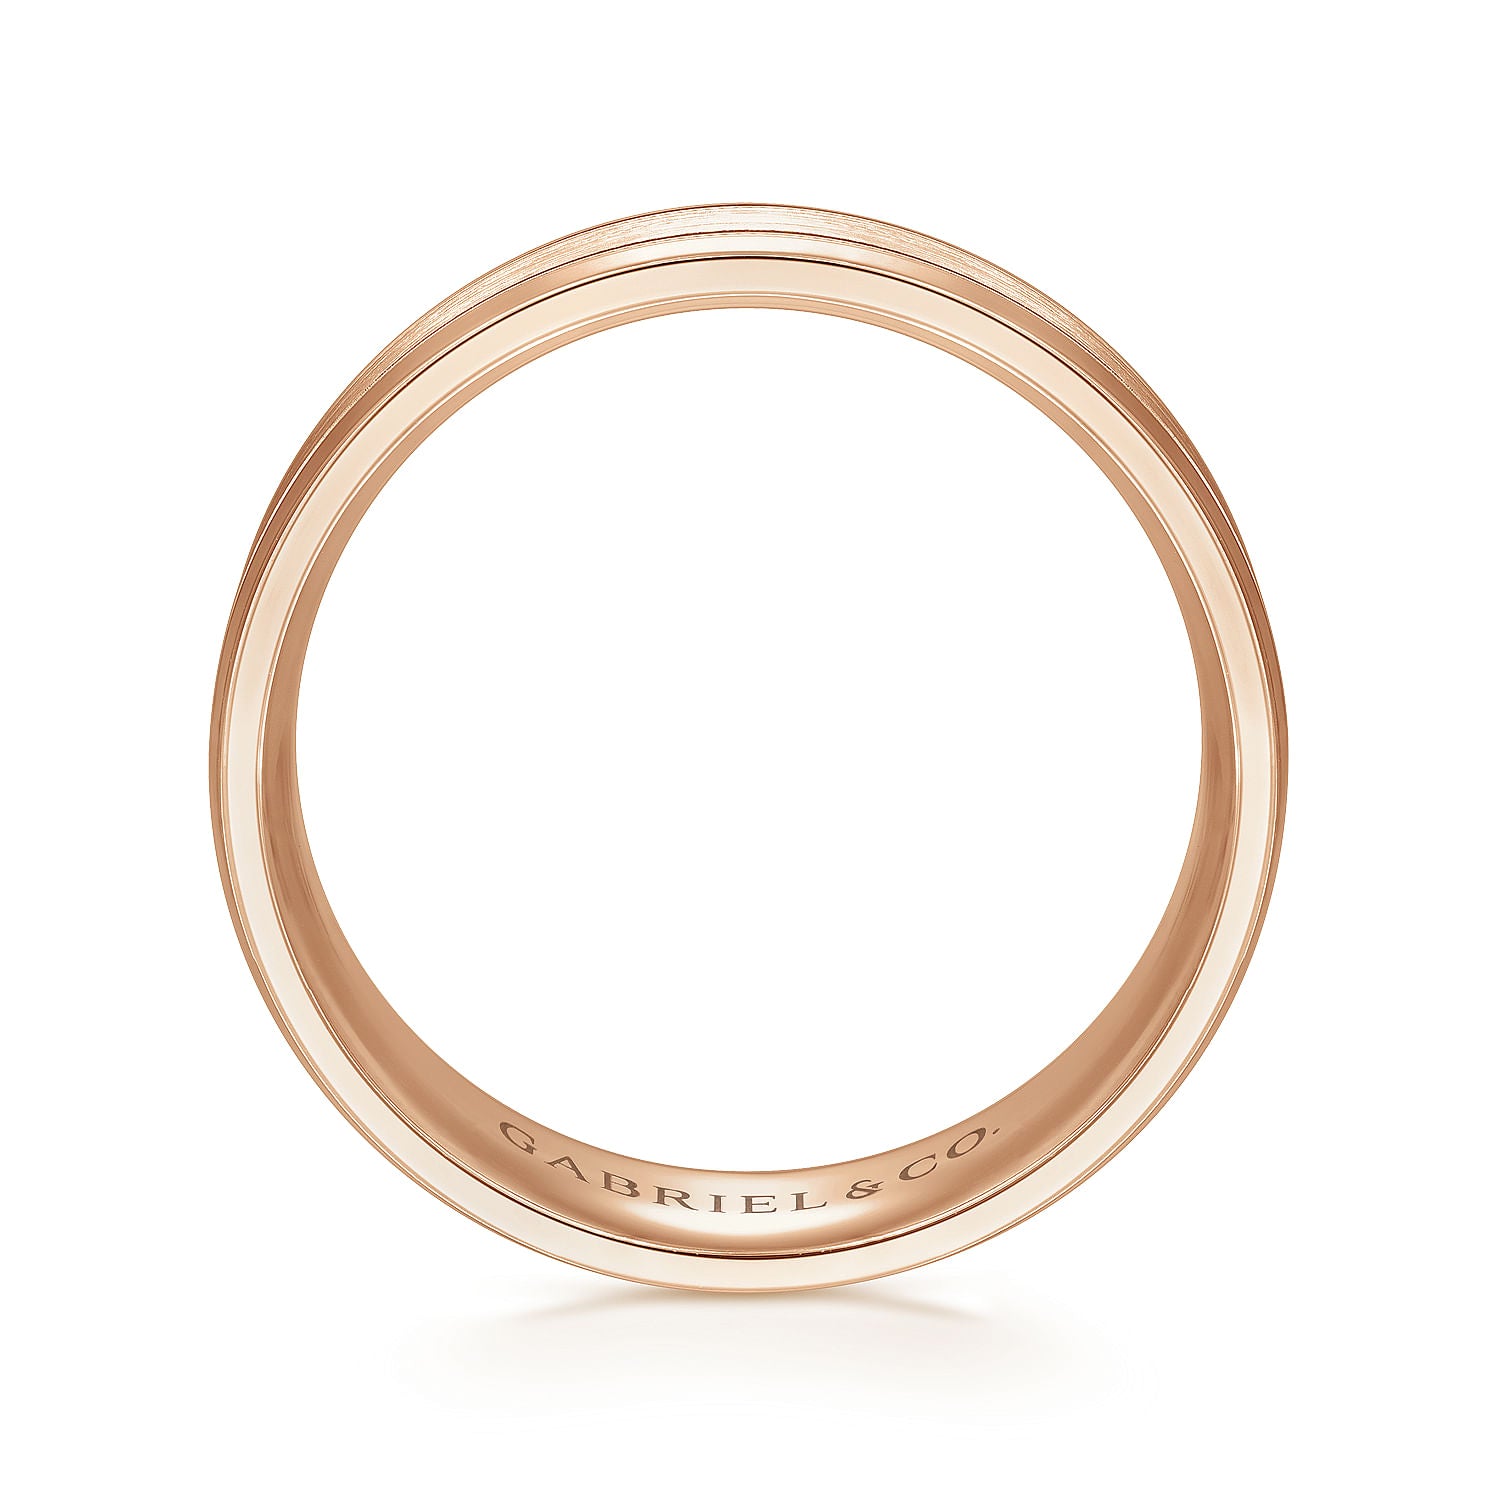 Gabriel & Co Rose Gold Wedding Band With A Satin Center And Milgrain Edge - Gold Wedding Bands - Men's